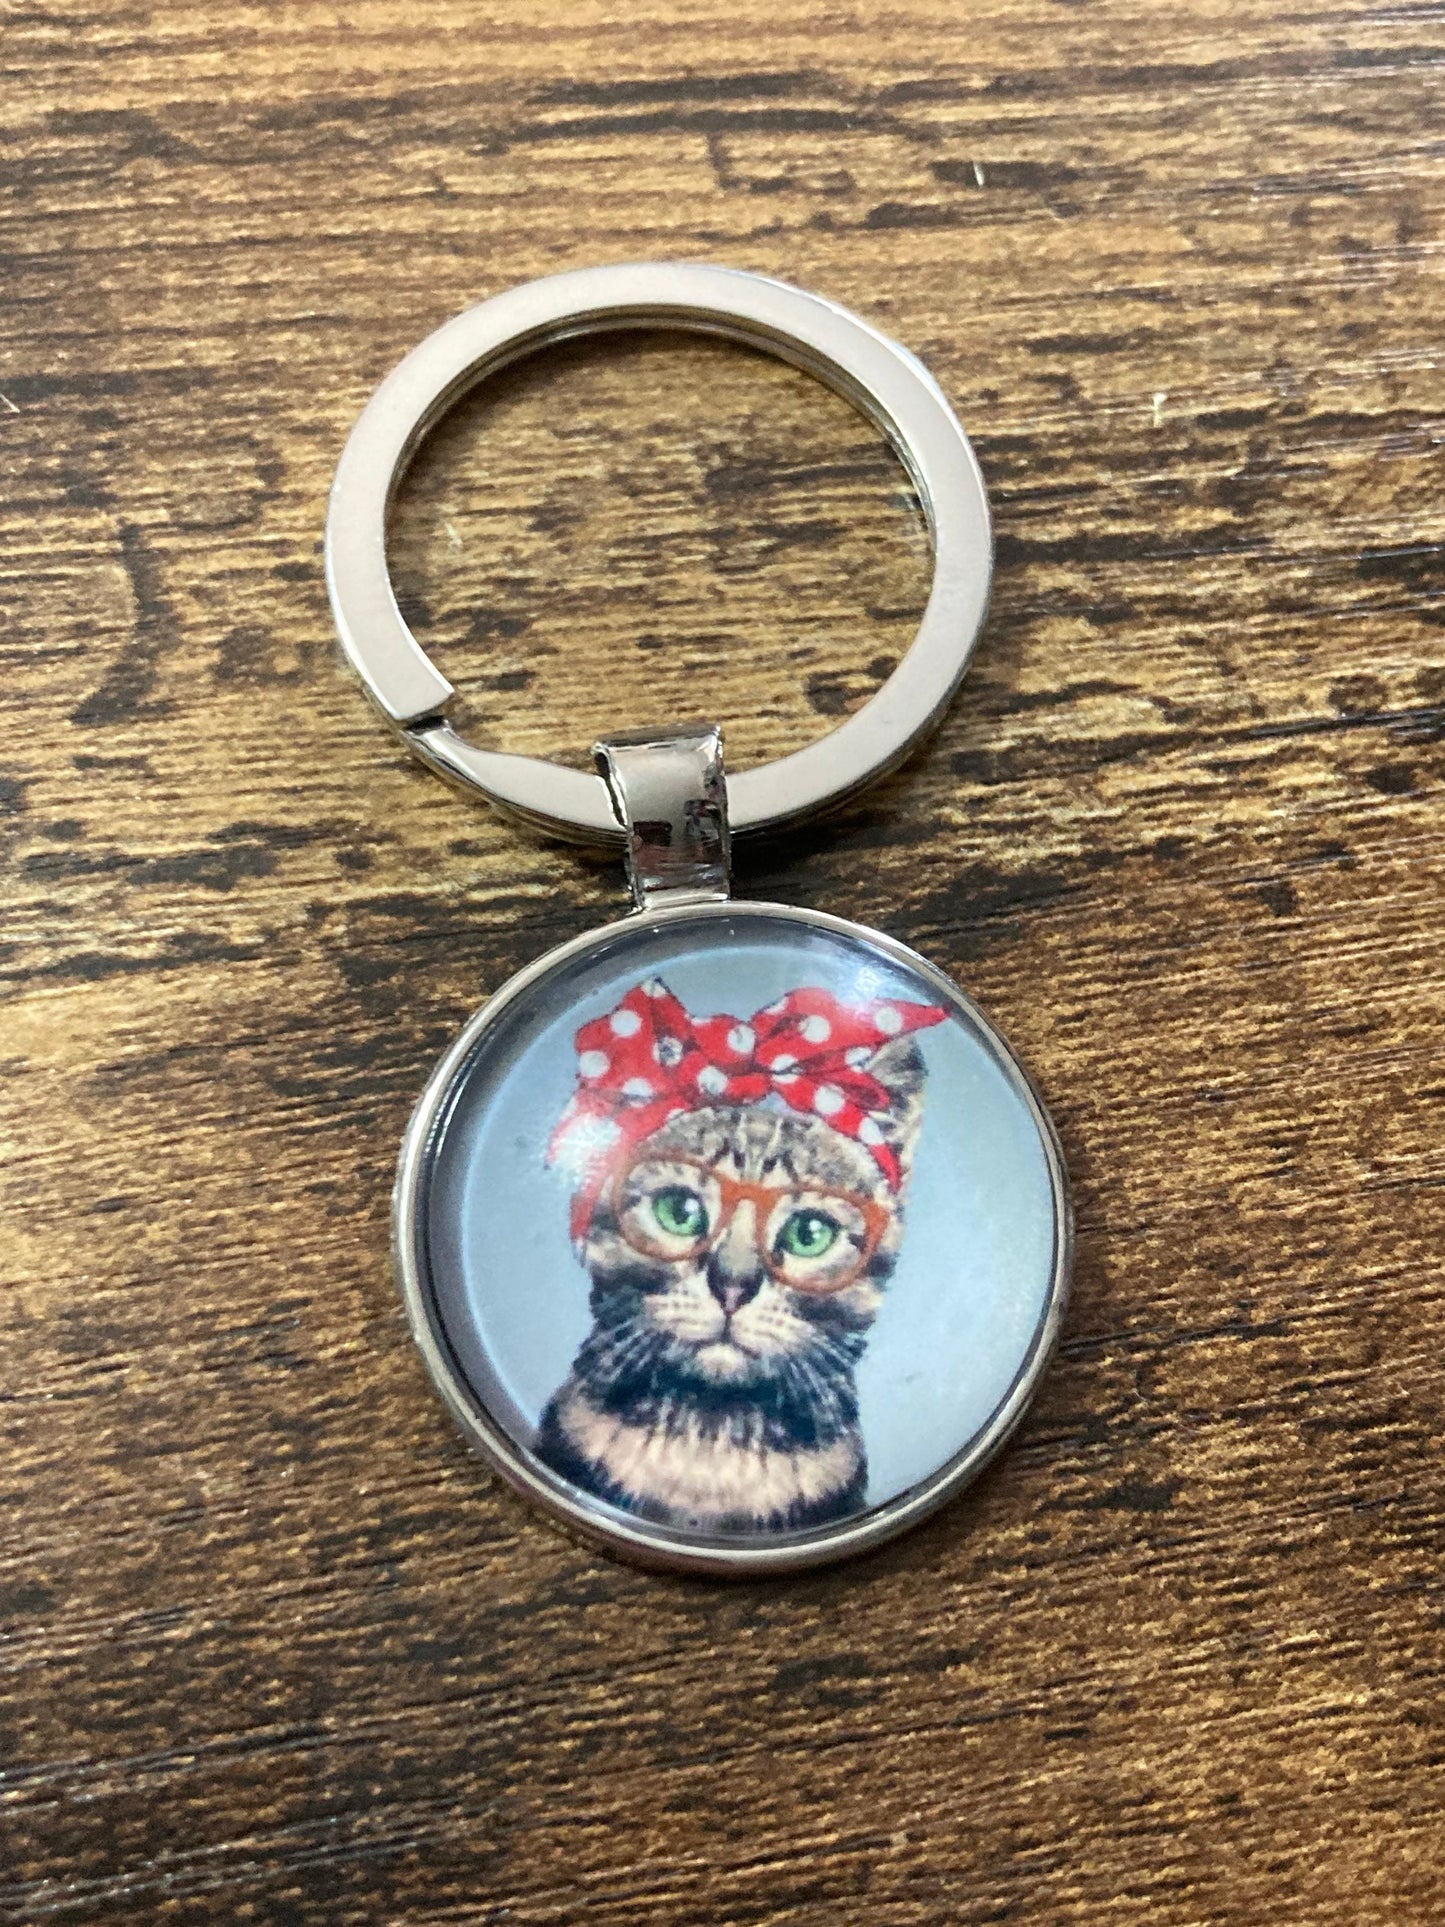 Vintage cat keyring silver tone key ring with 25mm glass cabochon detail